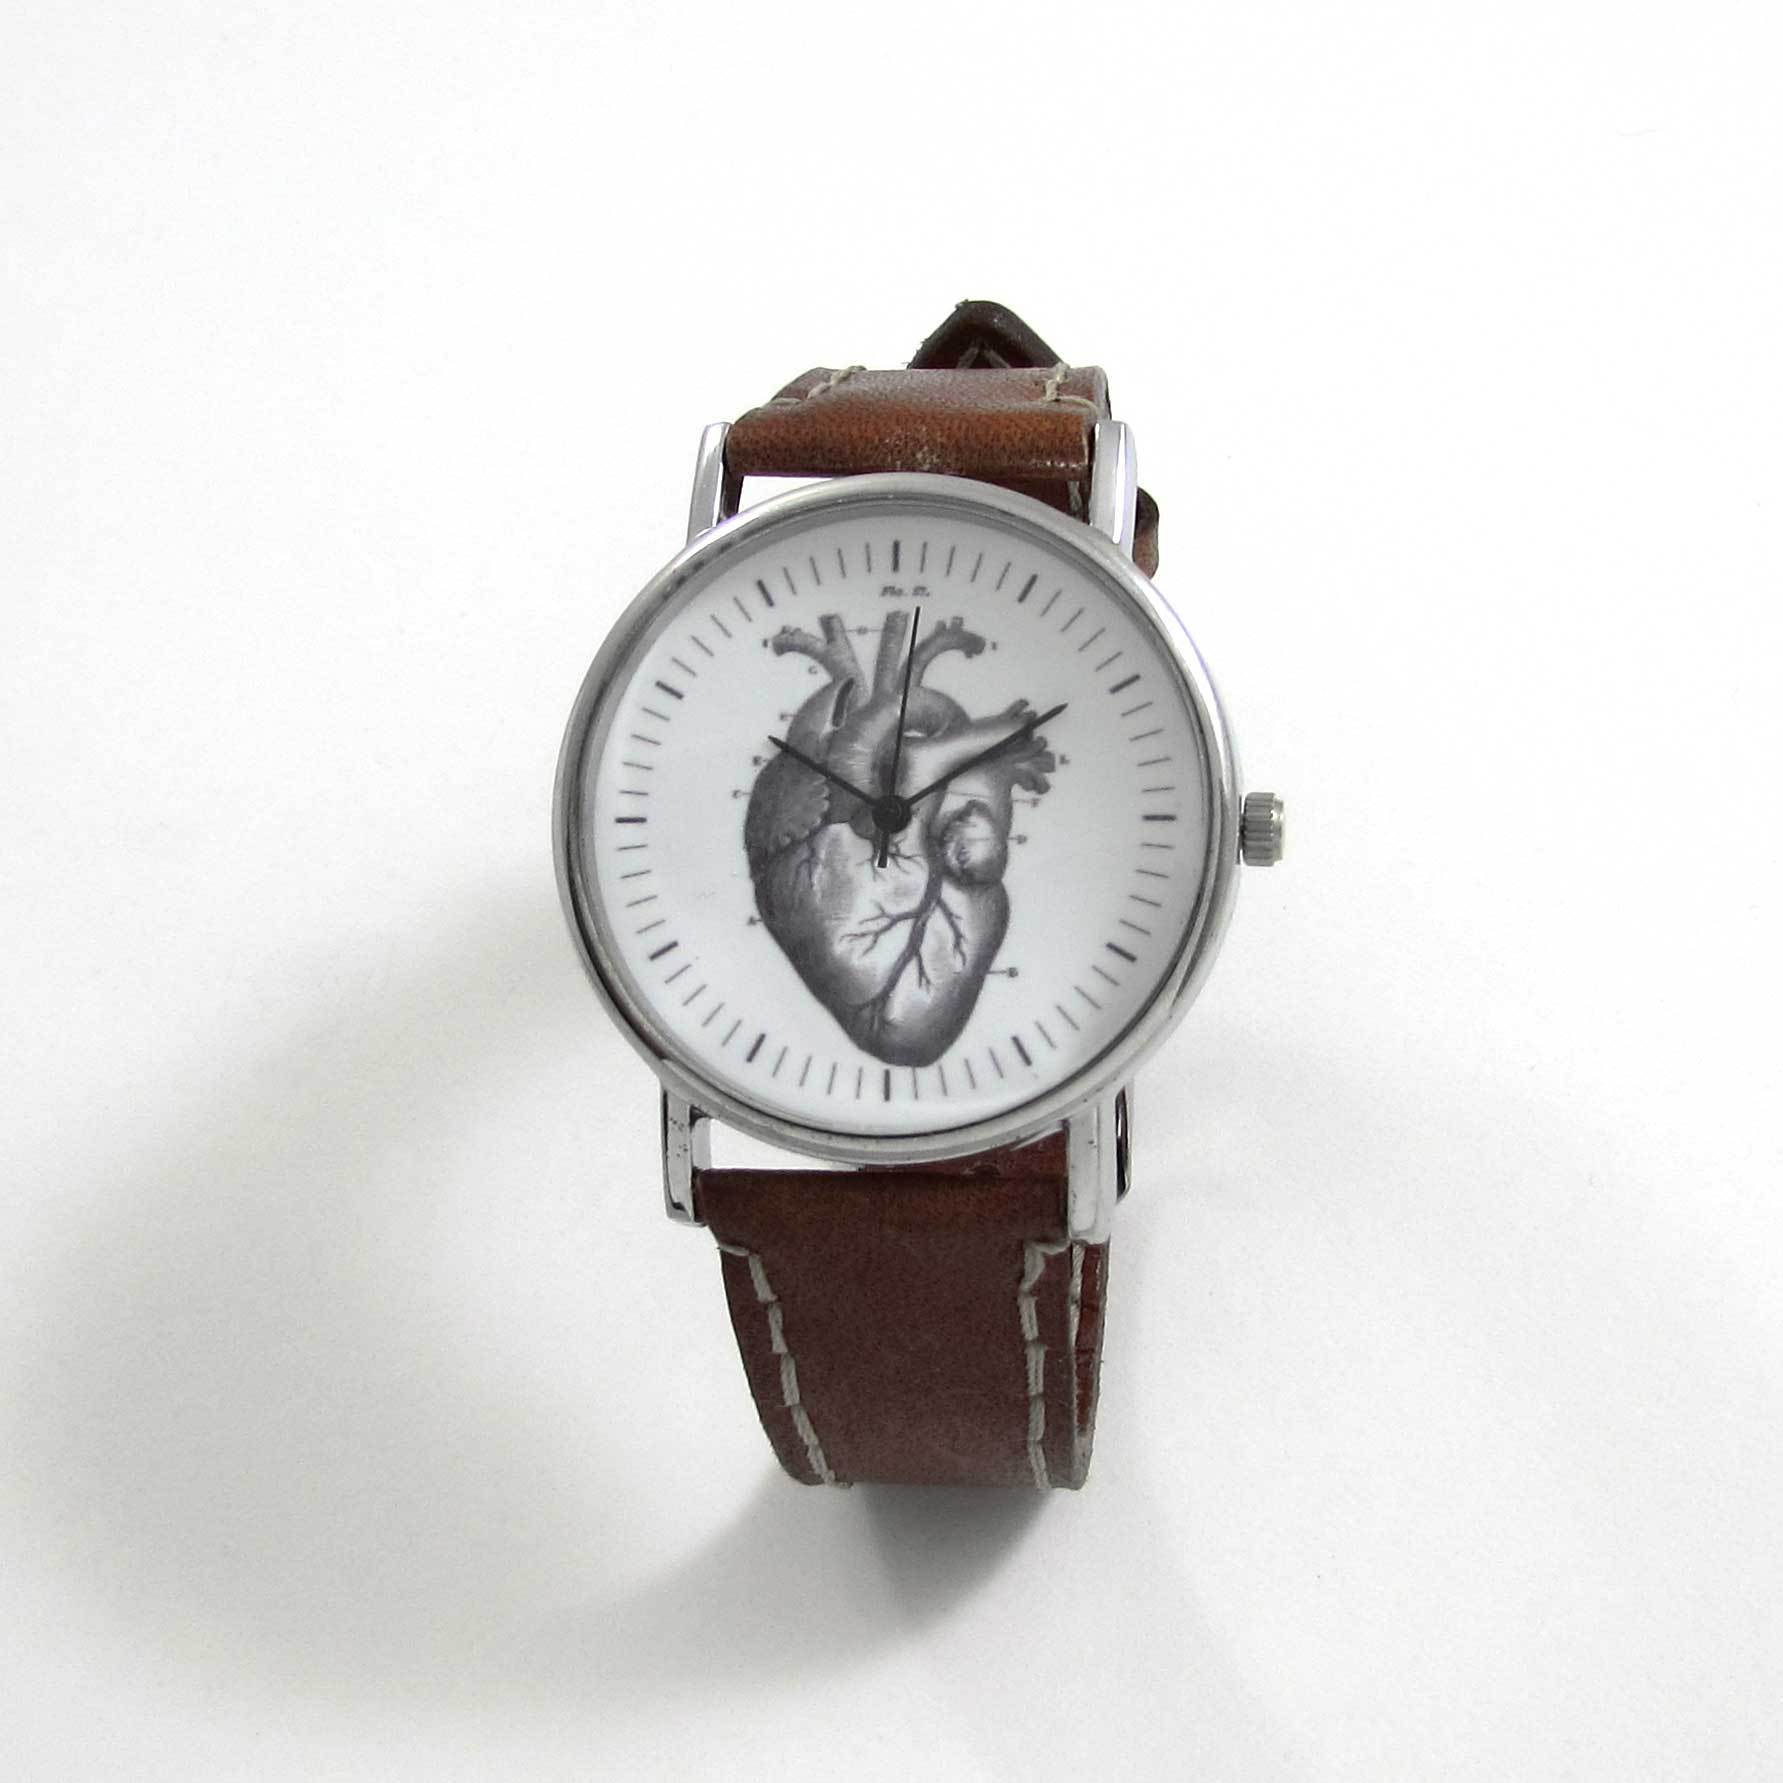 Anatomical Heart Brown Leather Wrist Watch - TheExCB